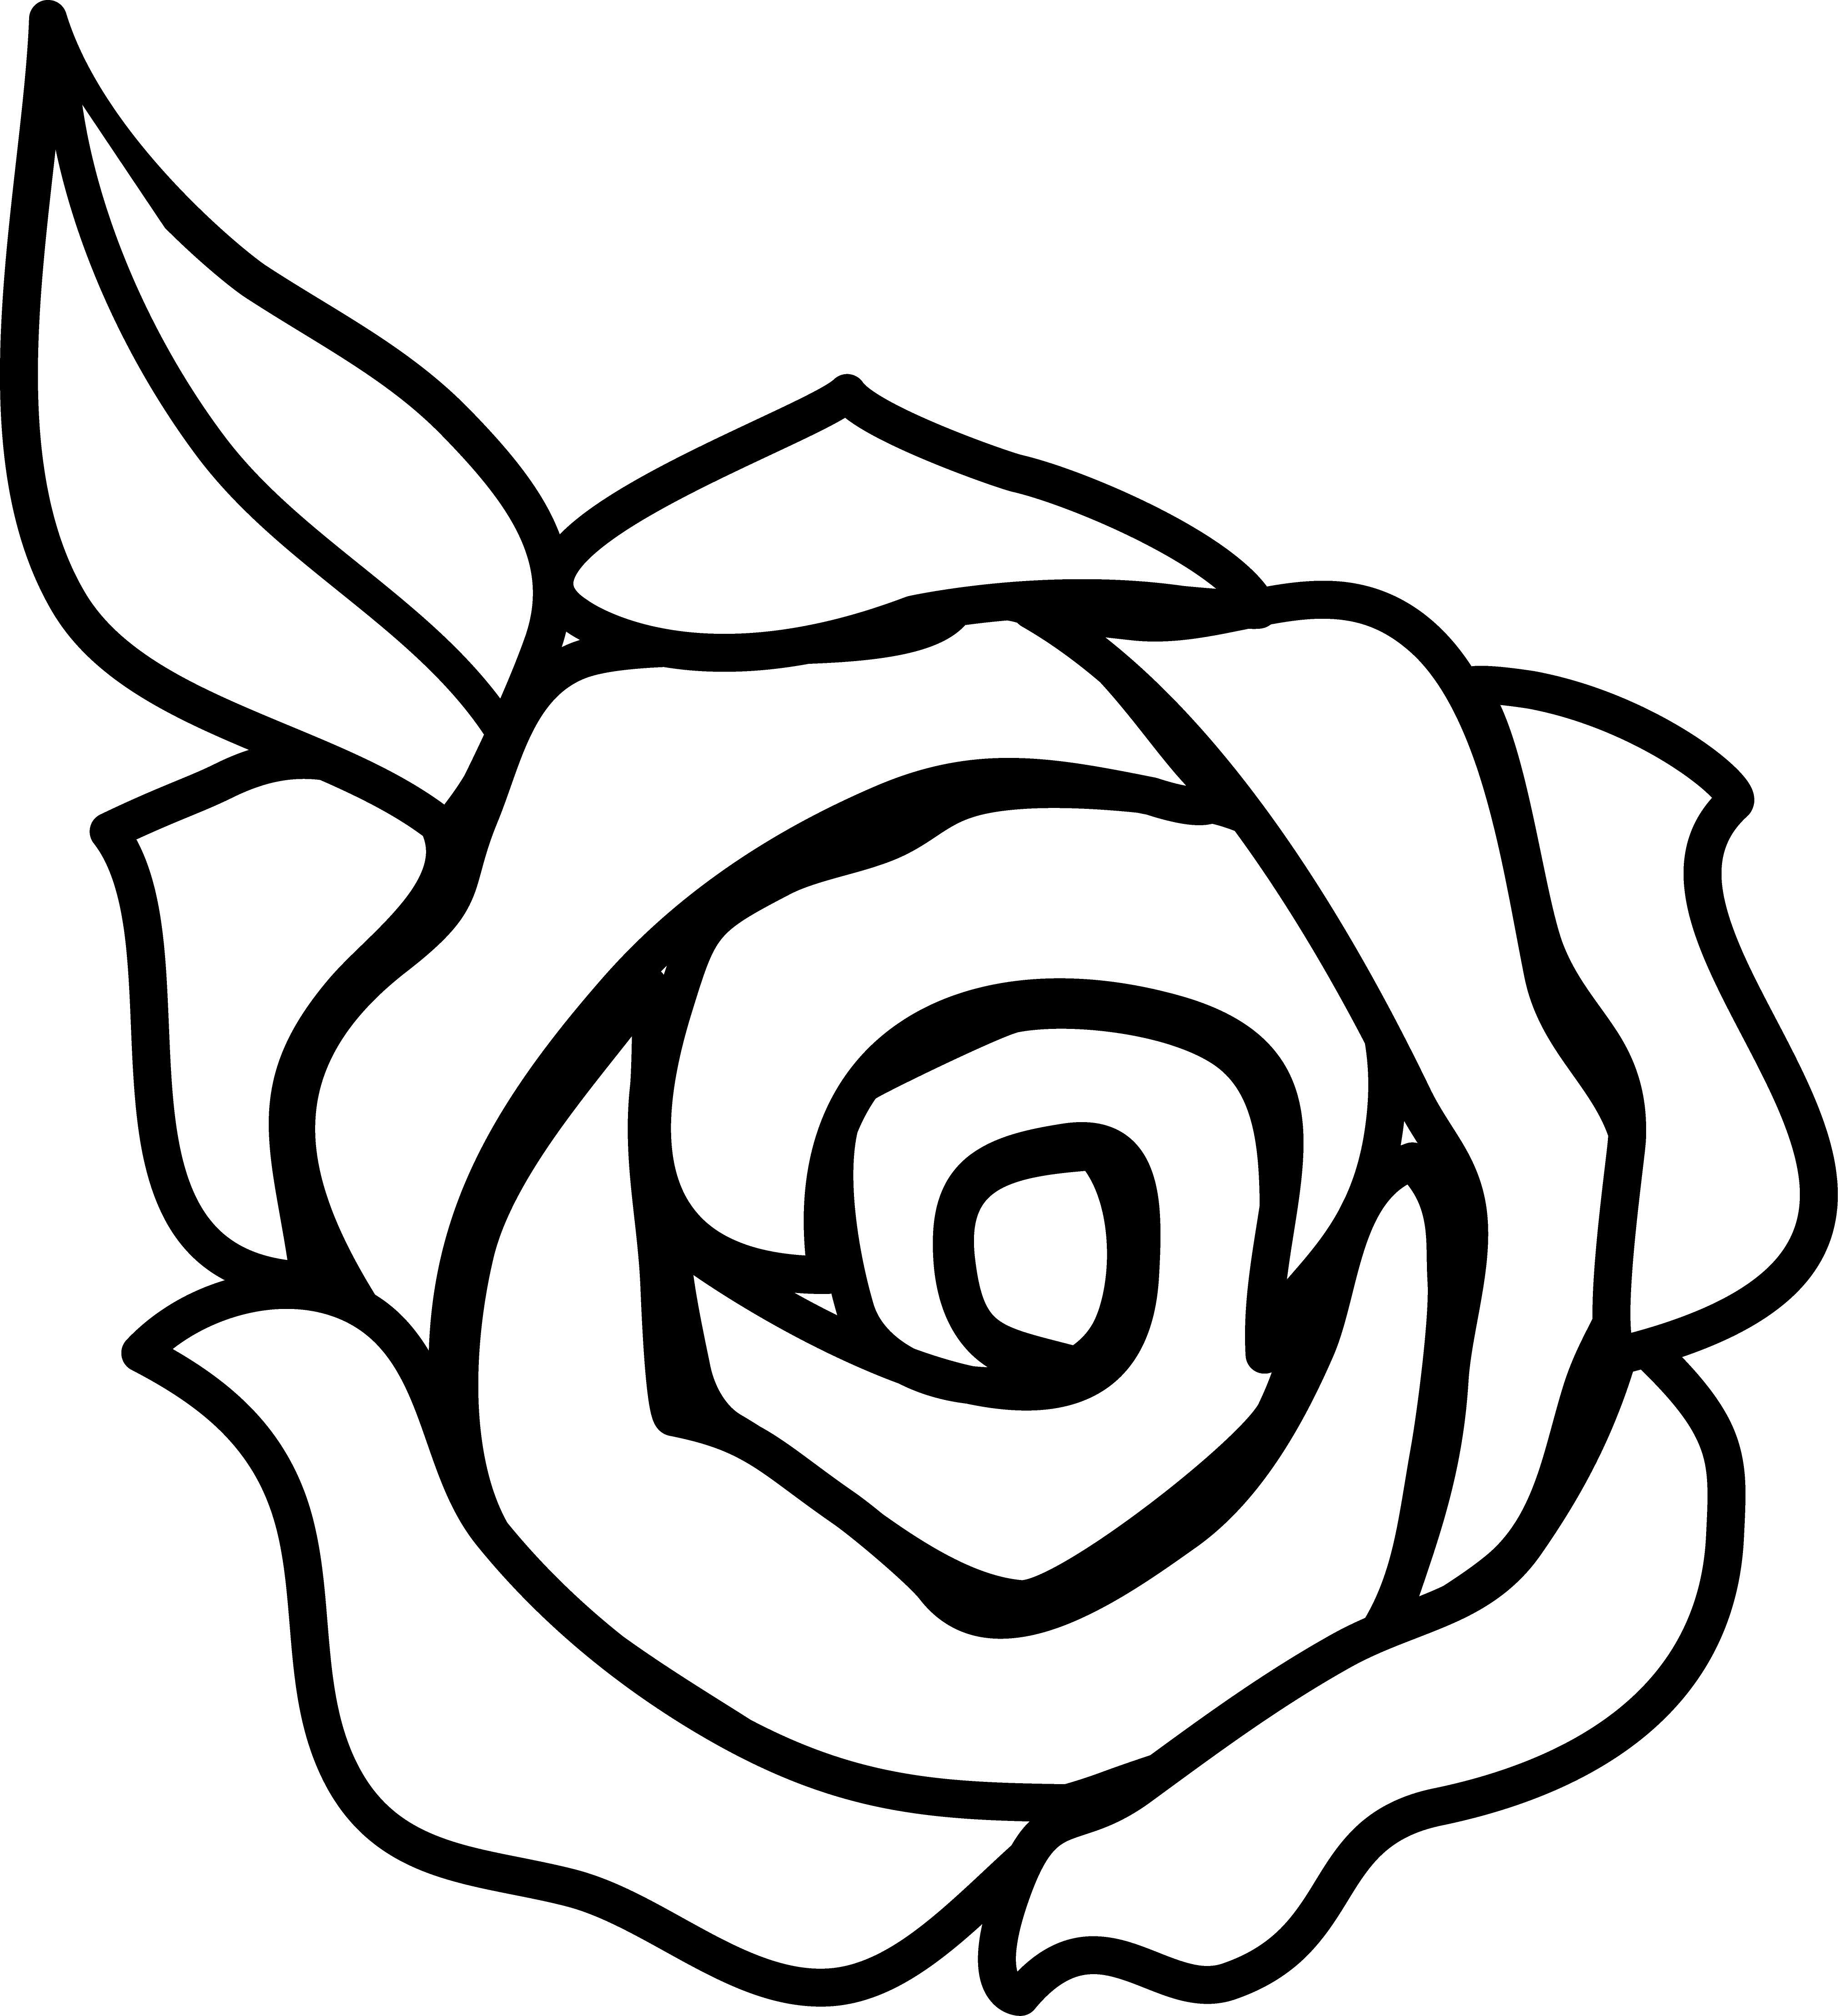 Rose Black And White Drawing - Clipart library